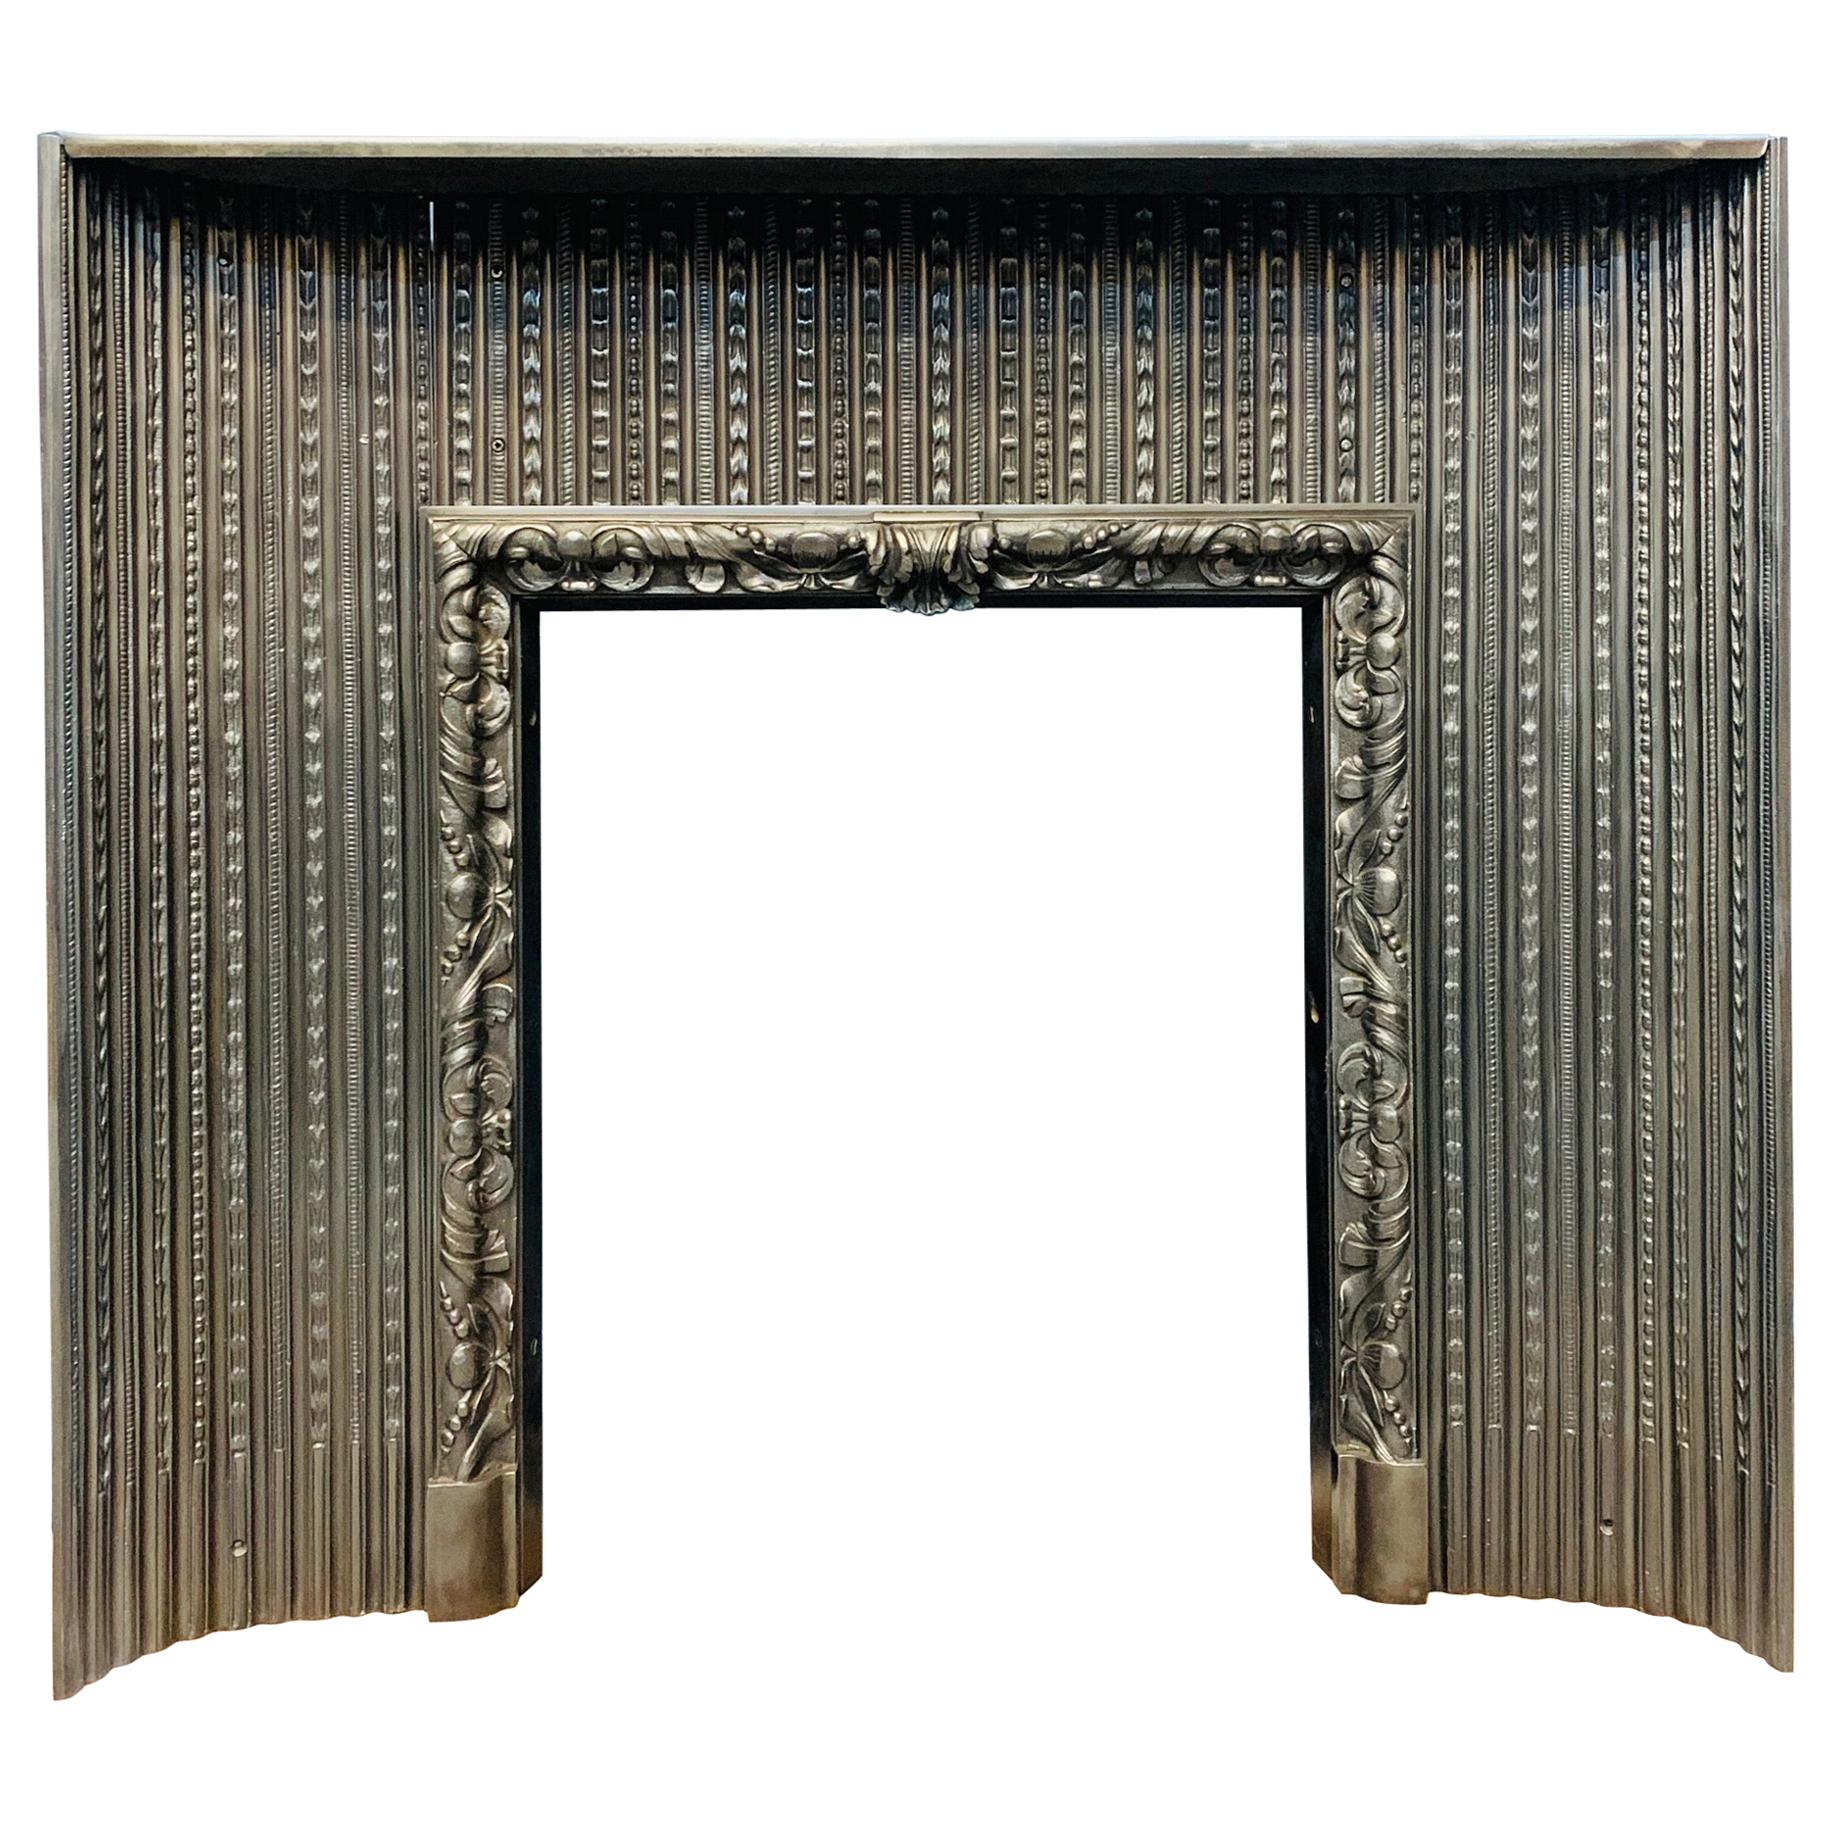 Early 19th Century Regency Acanthus Cast Iron Fireplace Insert For Sale